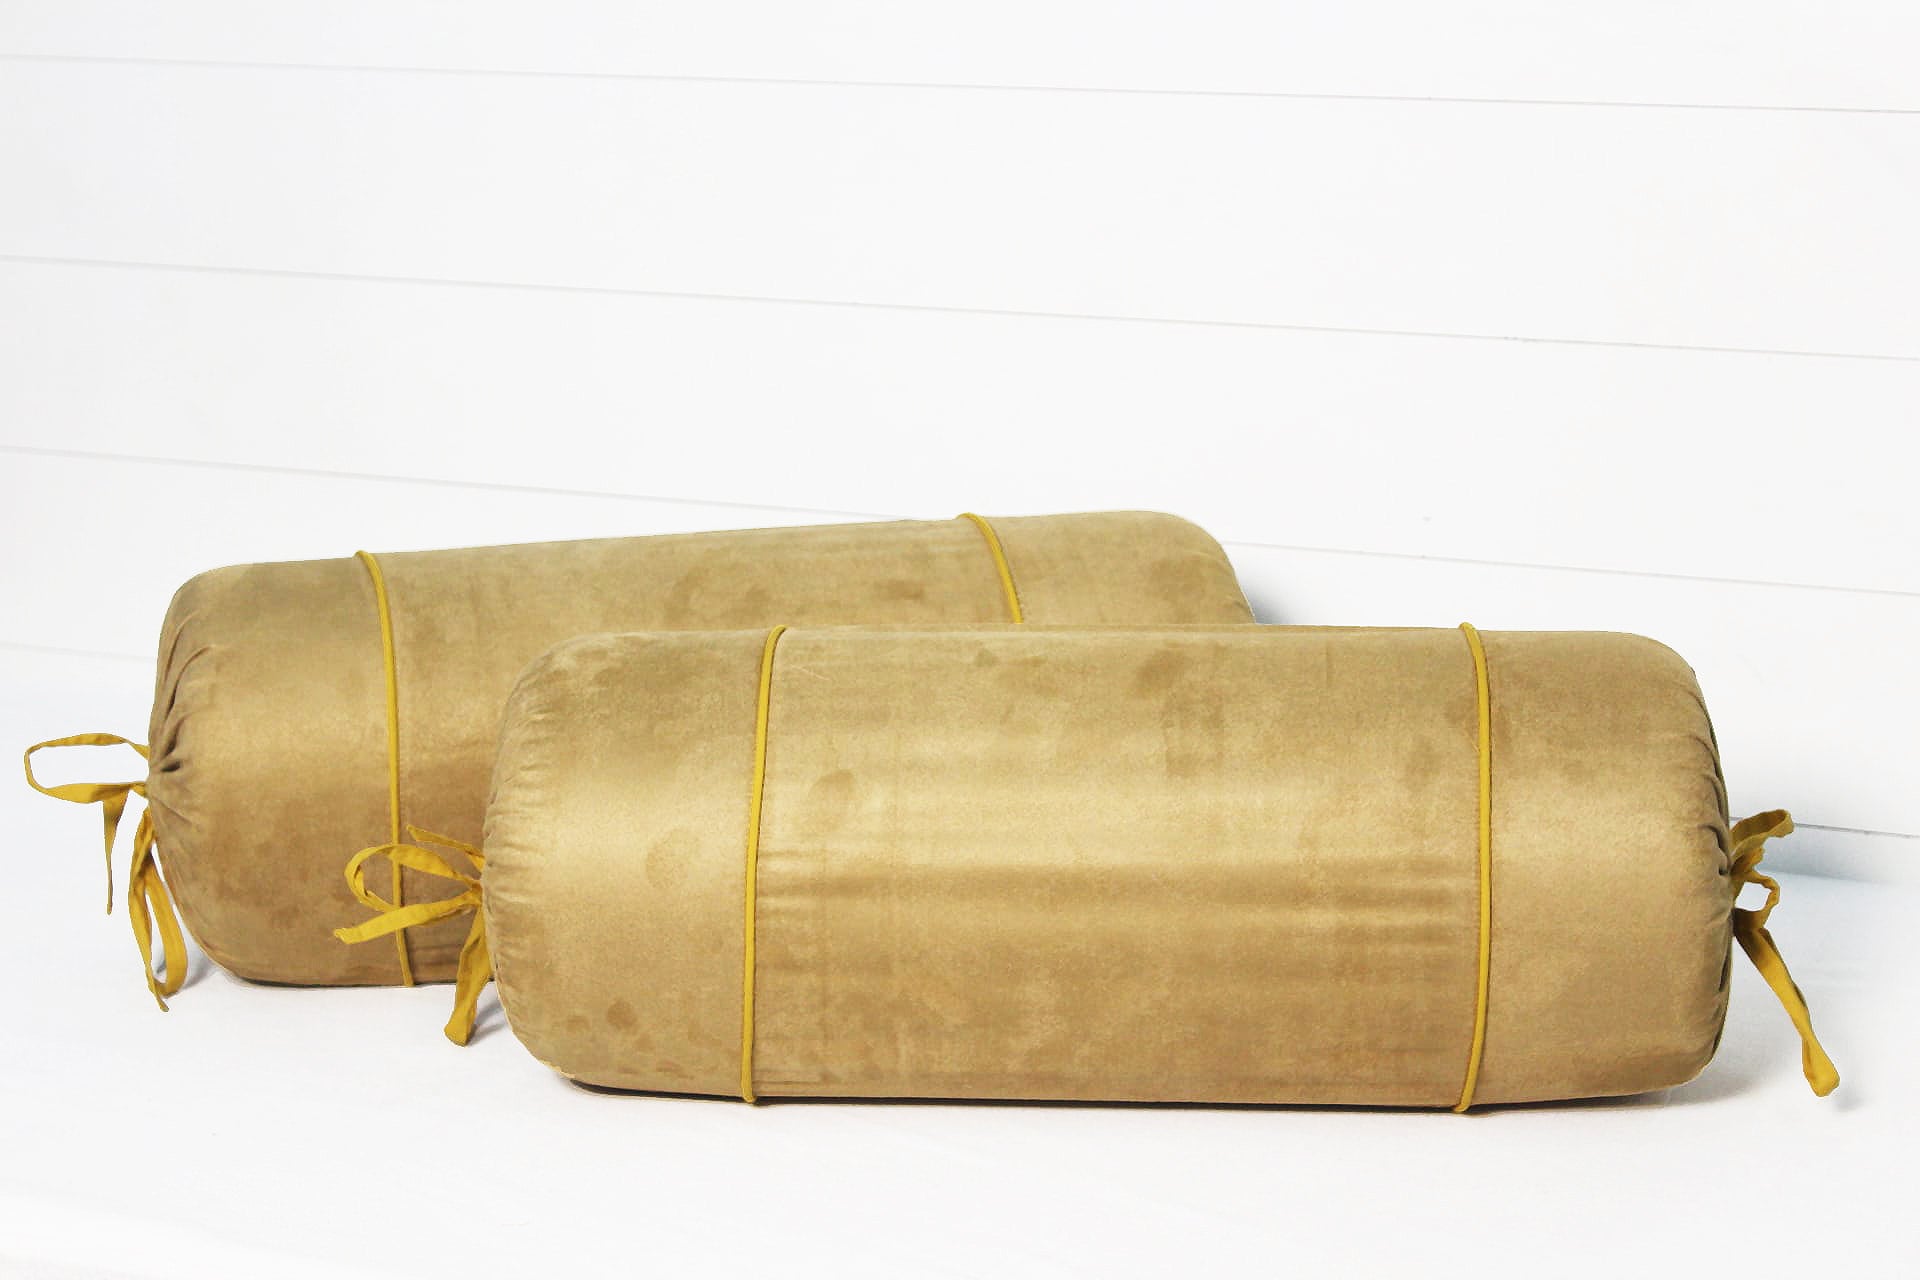 Luxurious Mustard Velvet Bolster Cover Set in Imported Suede Polyester Material -2Pcs 